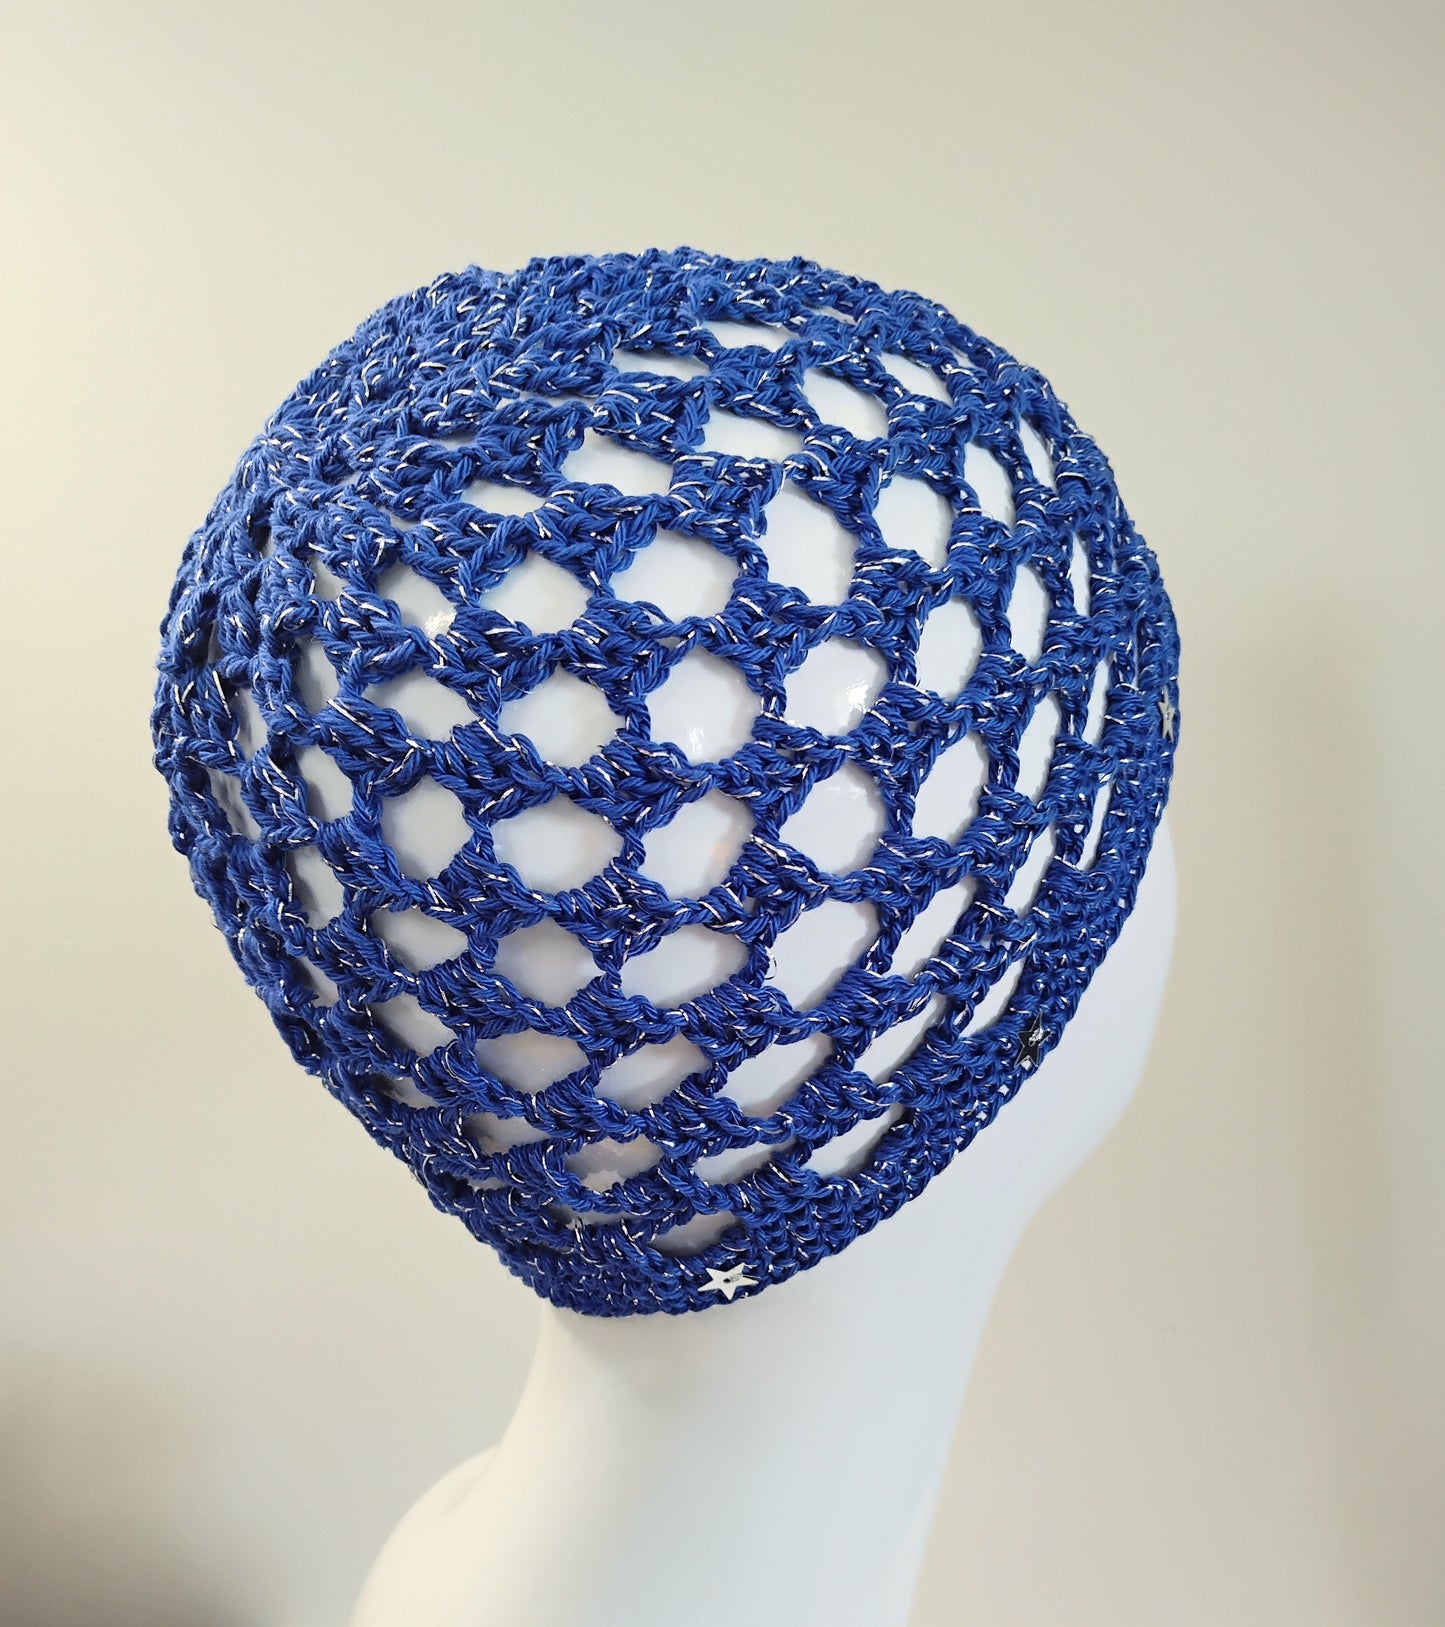 Blue and Silver Square Mesh Crochet Skull Cap with Silver Star Sequins